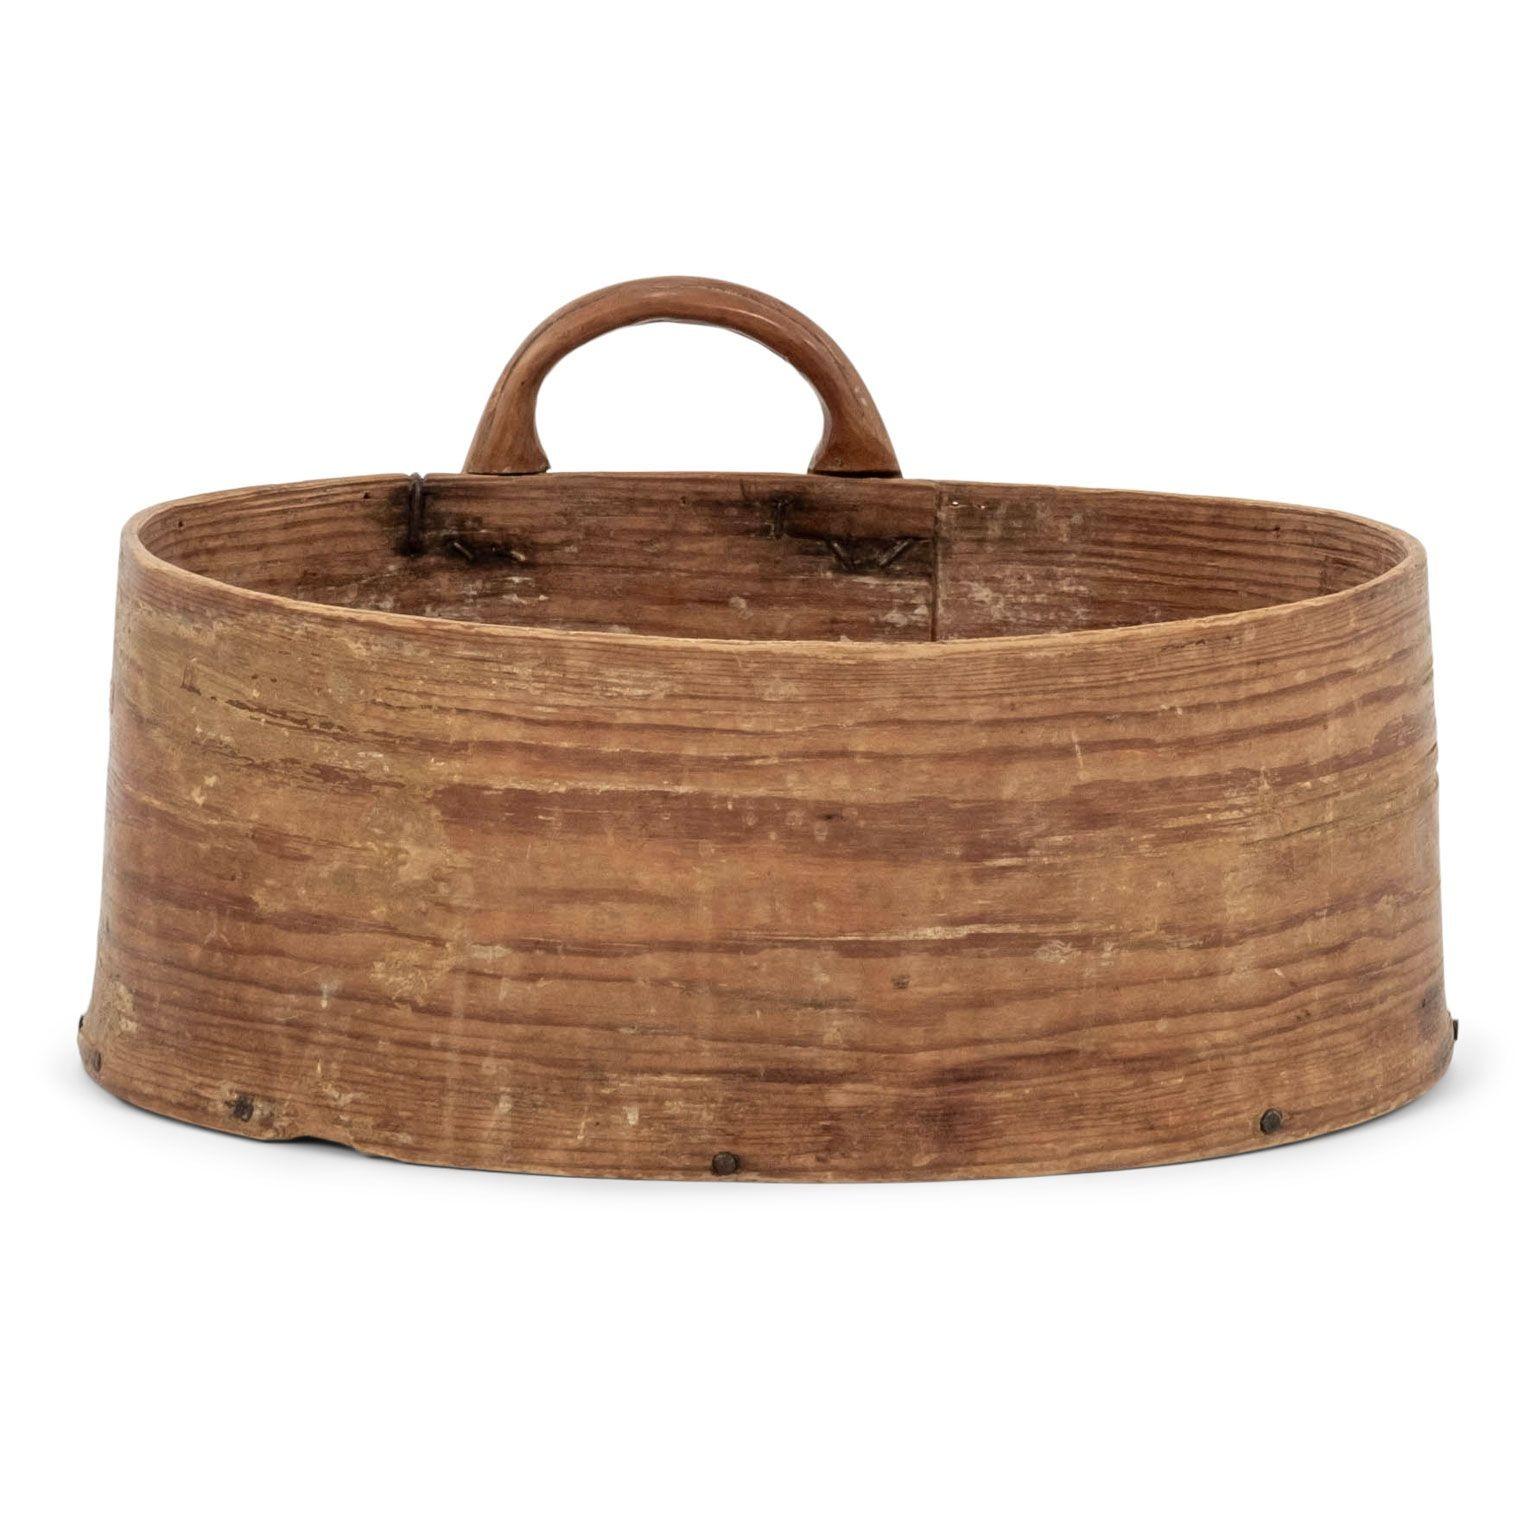 Swedish light color pine and bentwood box with handle. Originally used in the late 19th century as a grain scoop.

Note: Original/early finish on antique and vintage metal will include some, or all, of the following: patina, scaling, light rust,